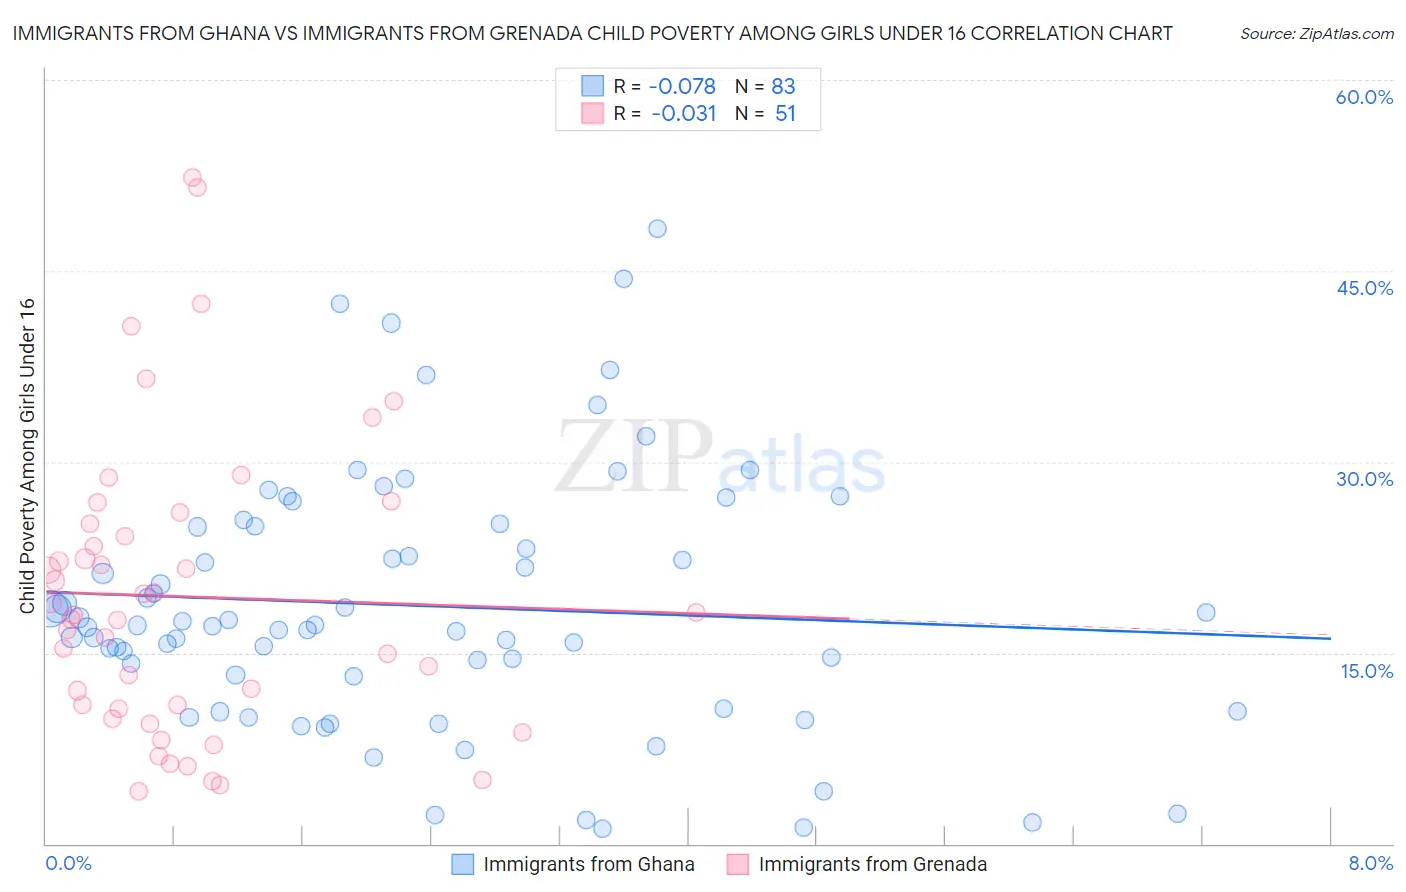 Immigrants from Ghana vs Immigrants from Grenada Child Poverty Among Girls Under 16